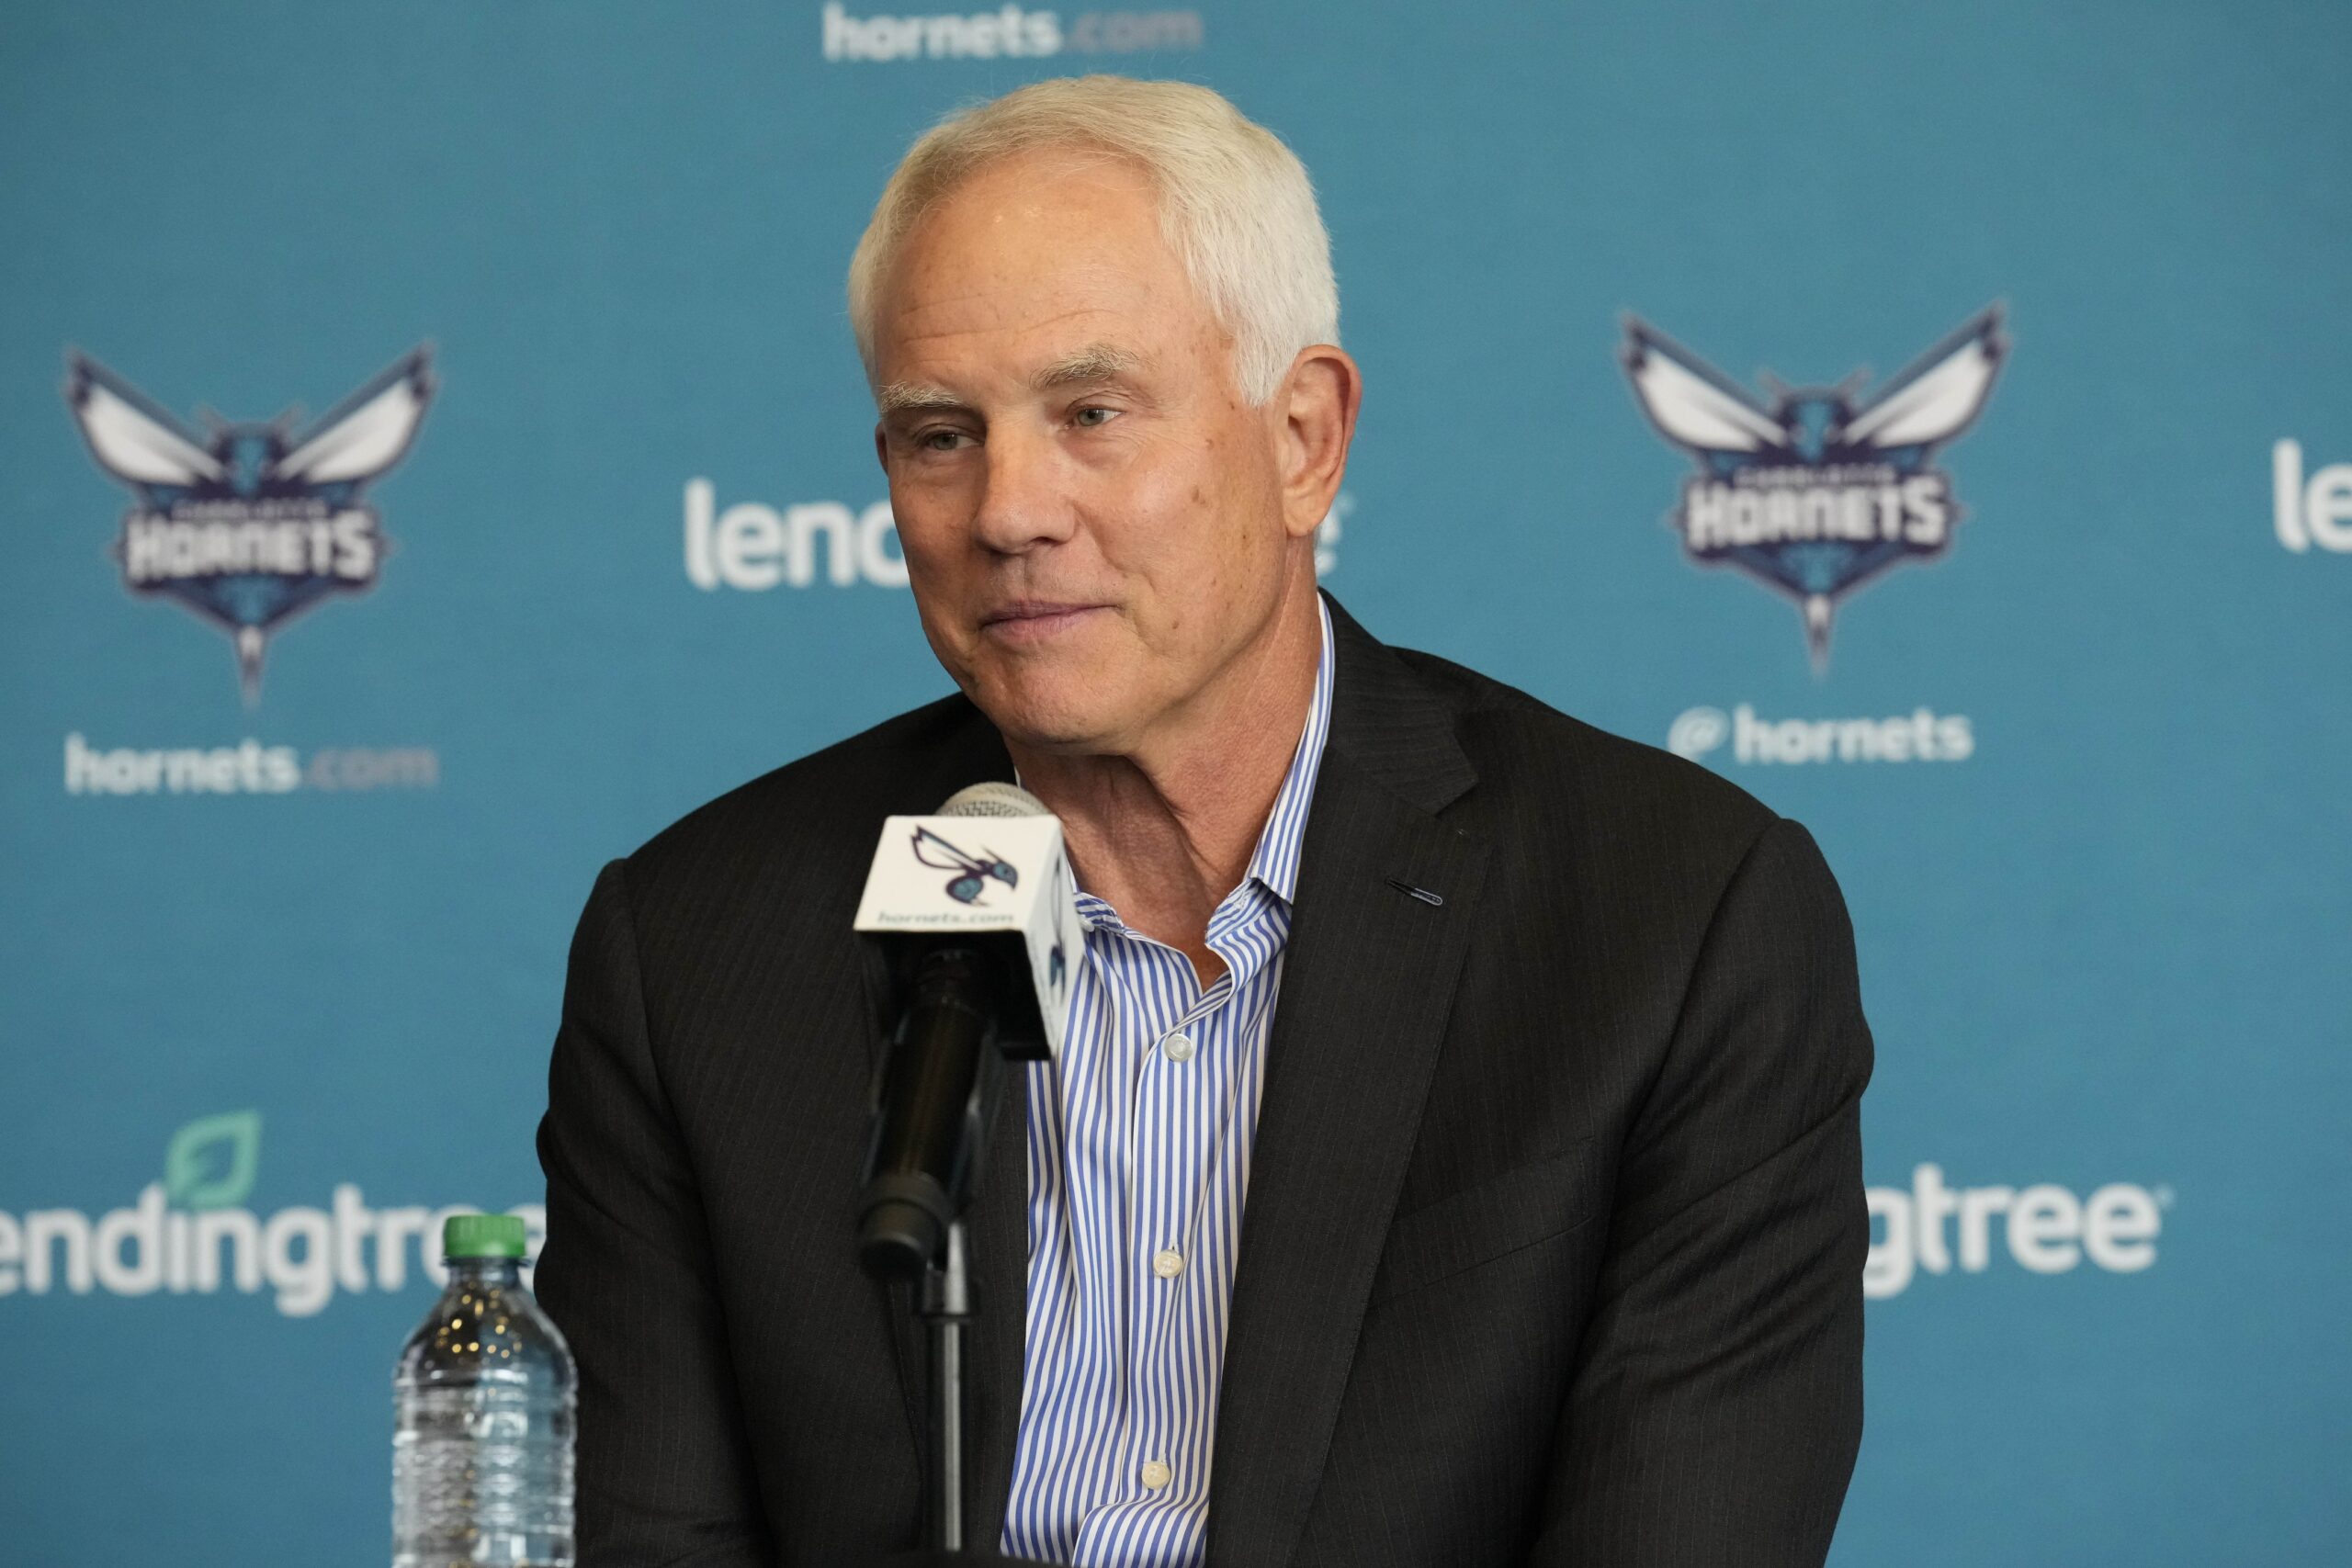 Charlotte Hornets general manager Mitch Kupchak answers media questions after announcing that Steve Clifford would return to coach the team at the Spectrum Center in Charlotte, NC.